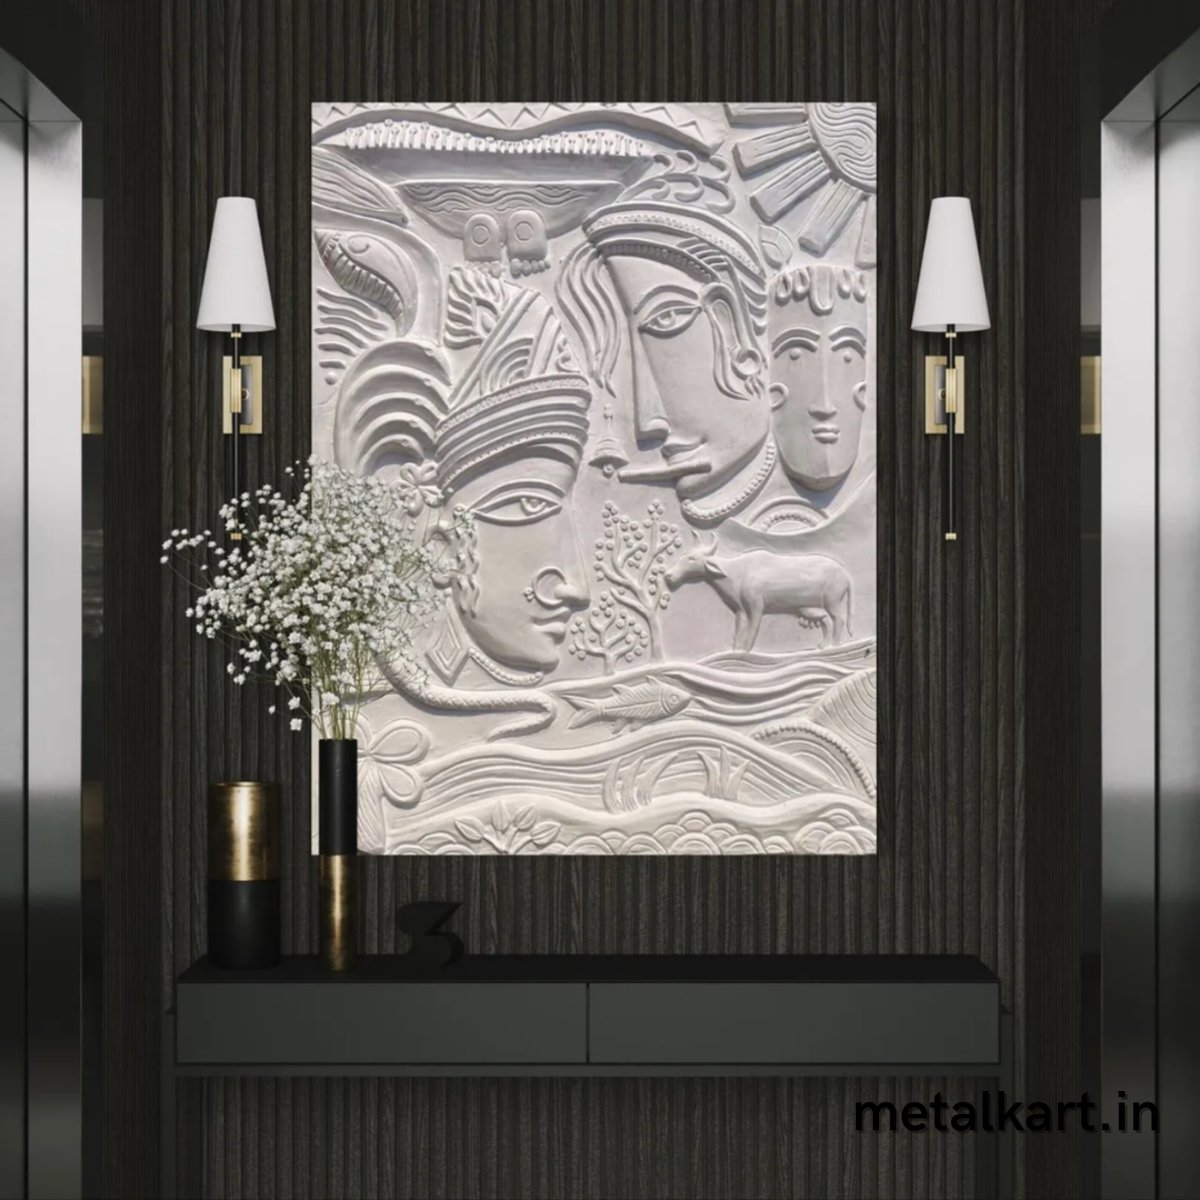 Radha Krishna 3D Relief Carving Cave Wall Art (36 x 24 Inches)